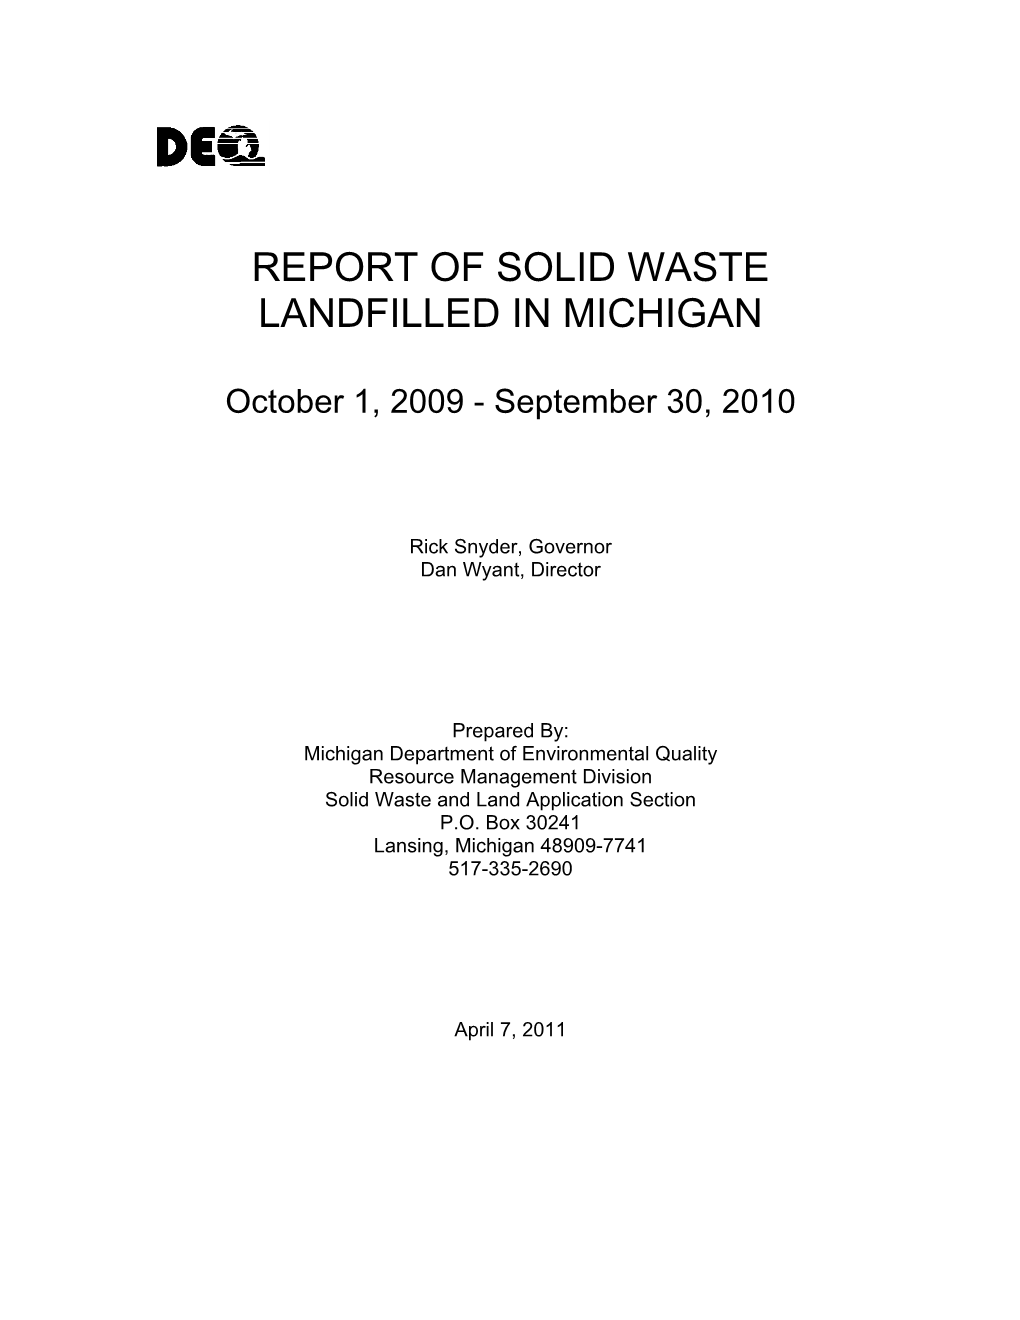 Report on Solid Waste Landfilled in Michigan for 2010